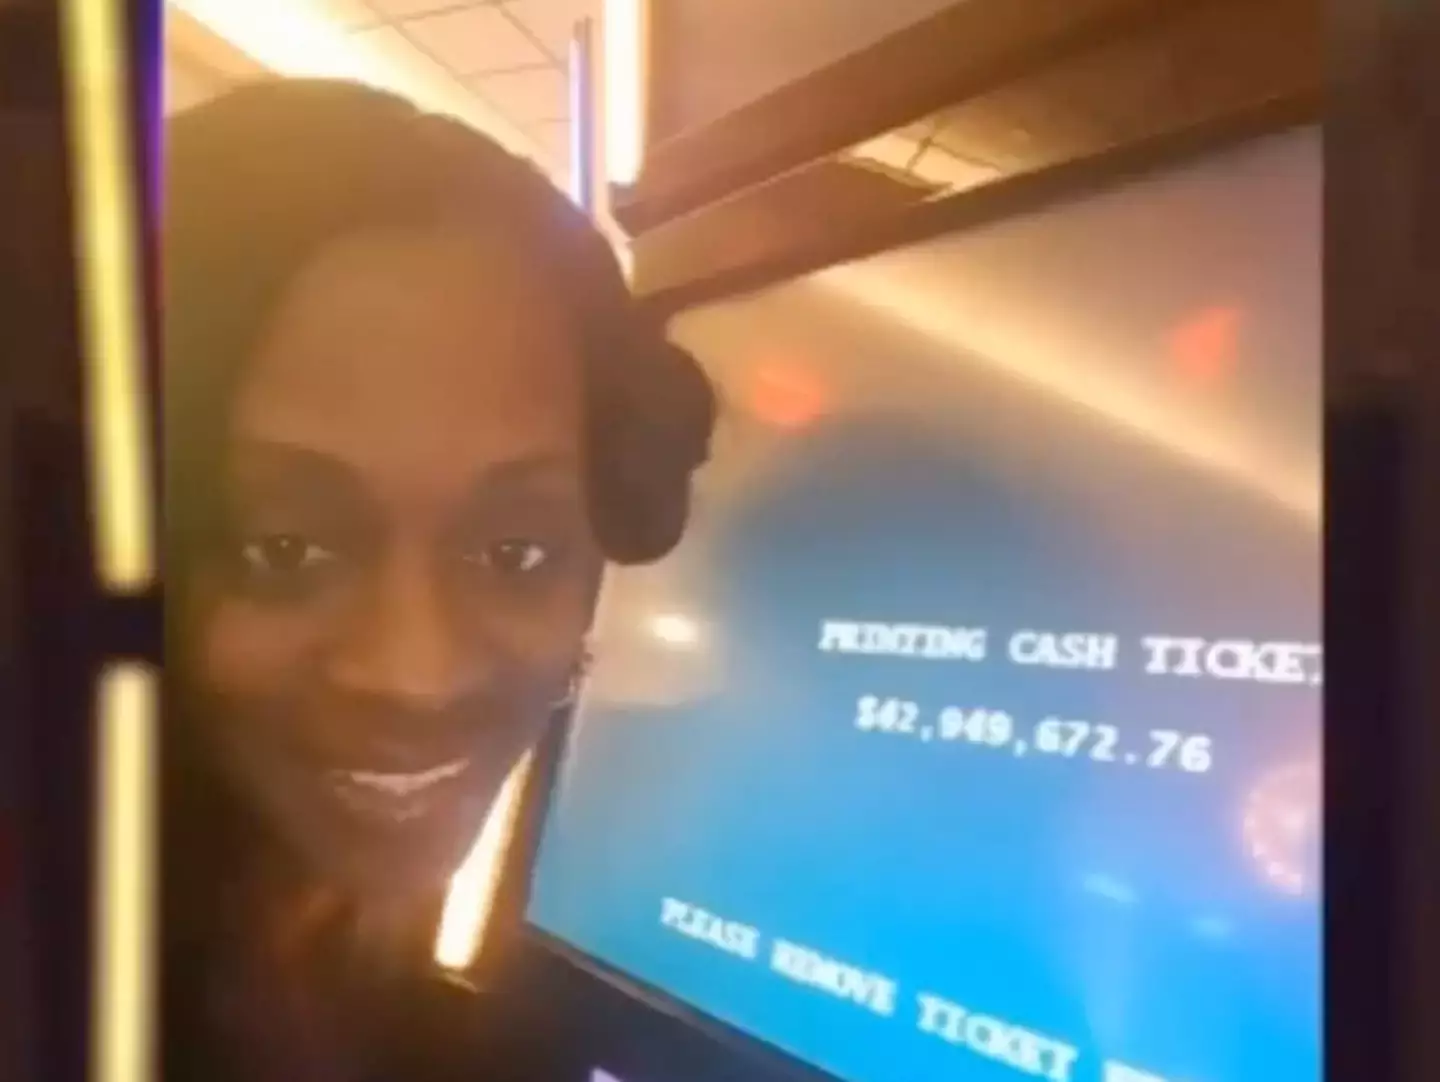 Katrina took a selfie by the machine when the eight-figure sum came up. (ABC7)